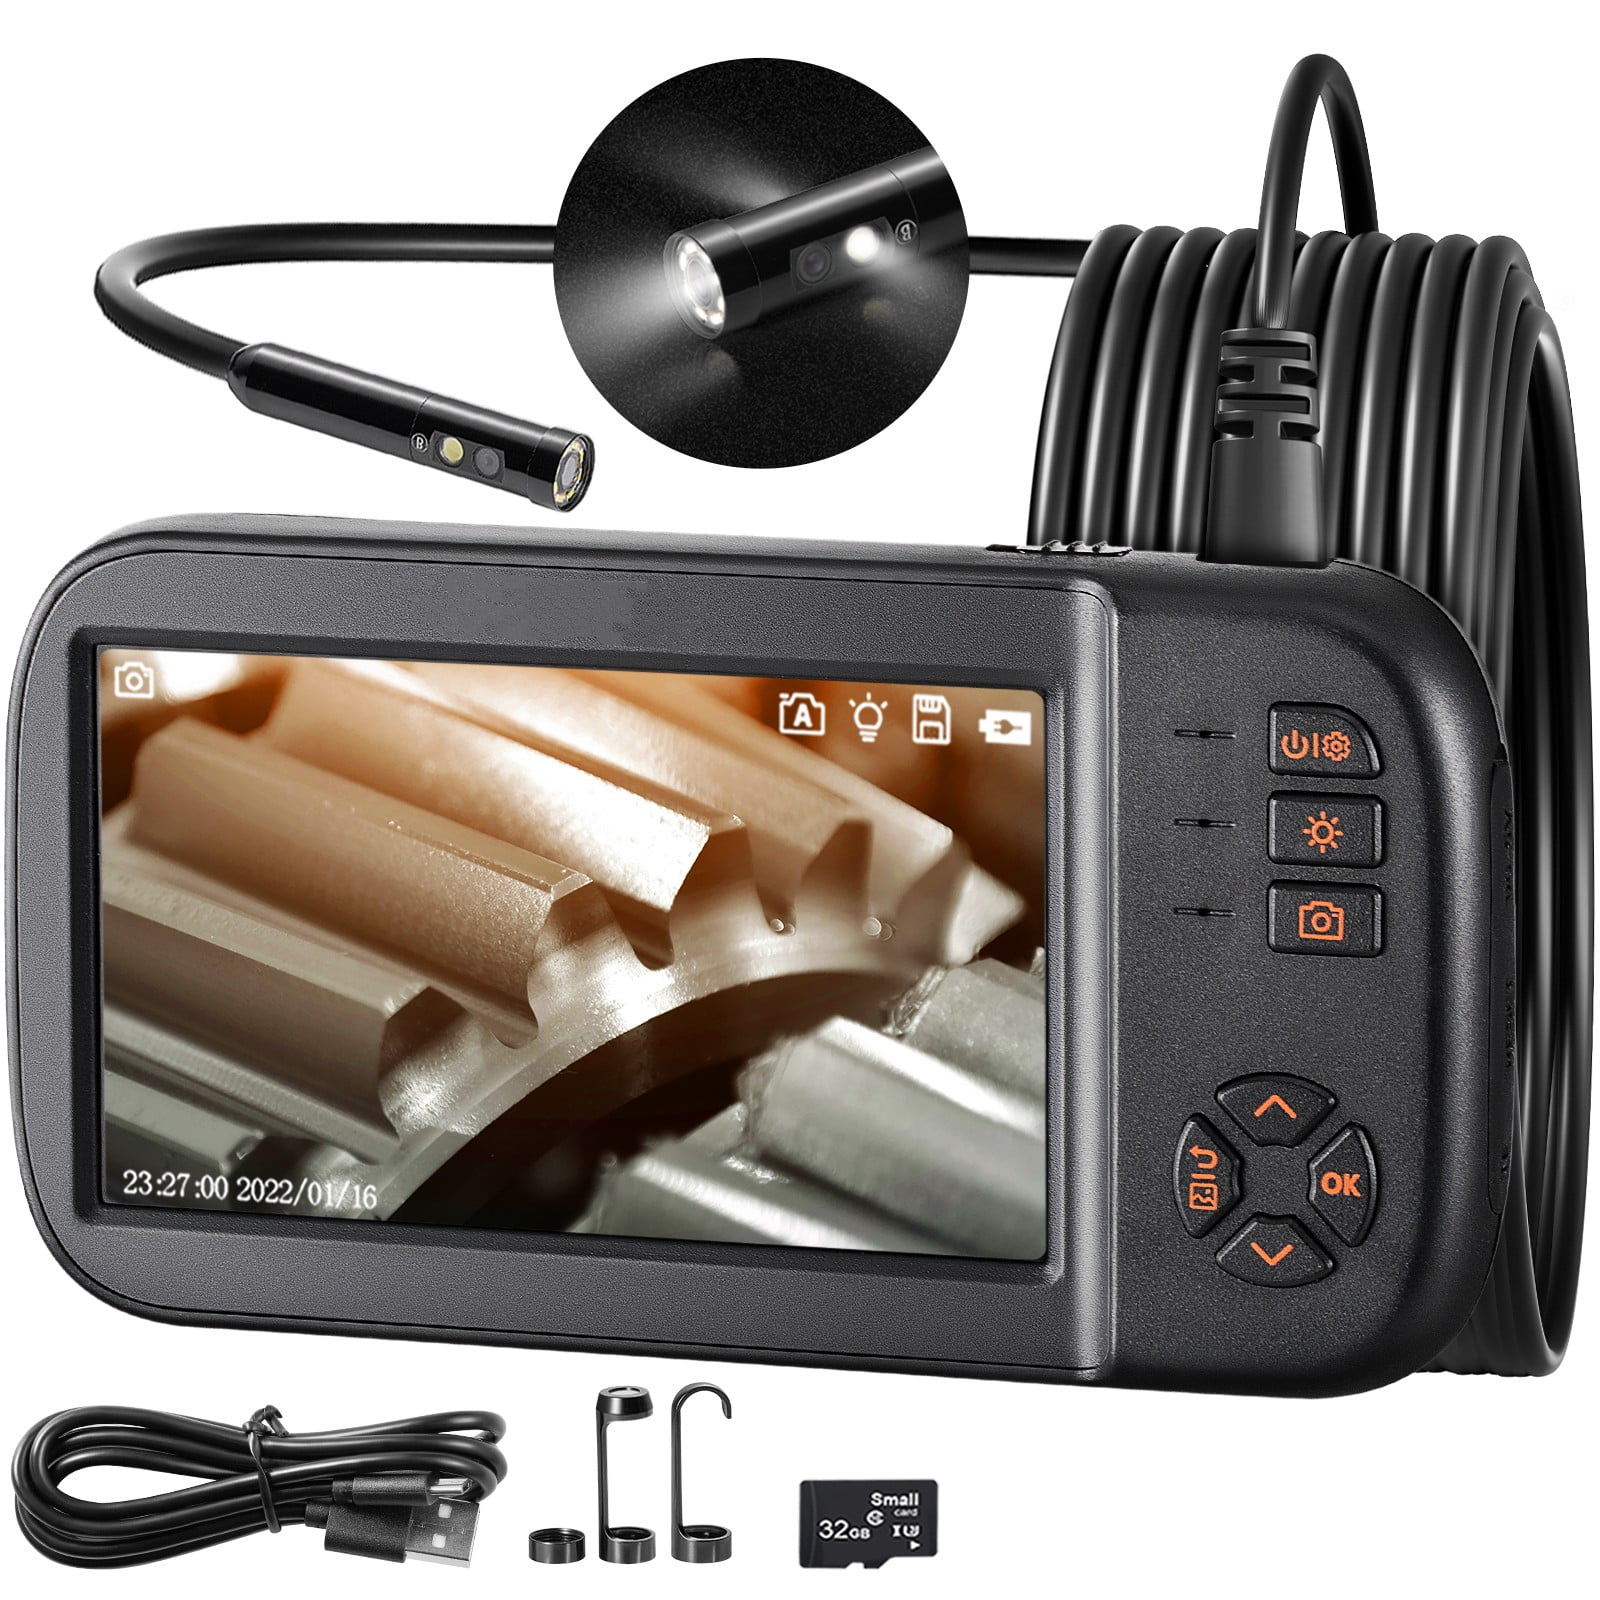 Triple Lens 1080p Borescope Inspection Camera with 5 IPS Screen, 10 L –  DEPSTECH